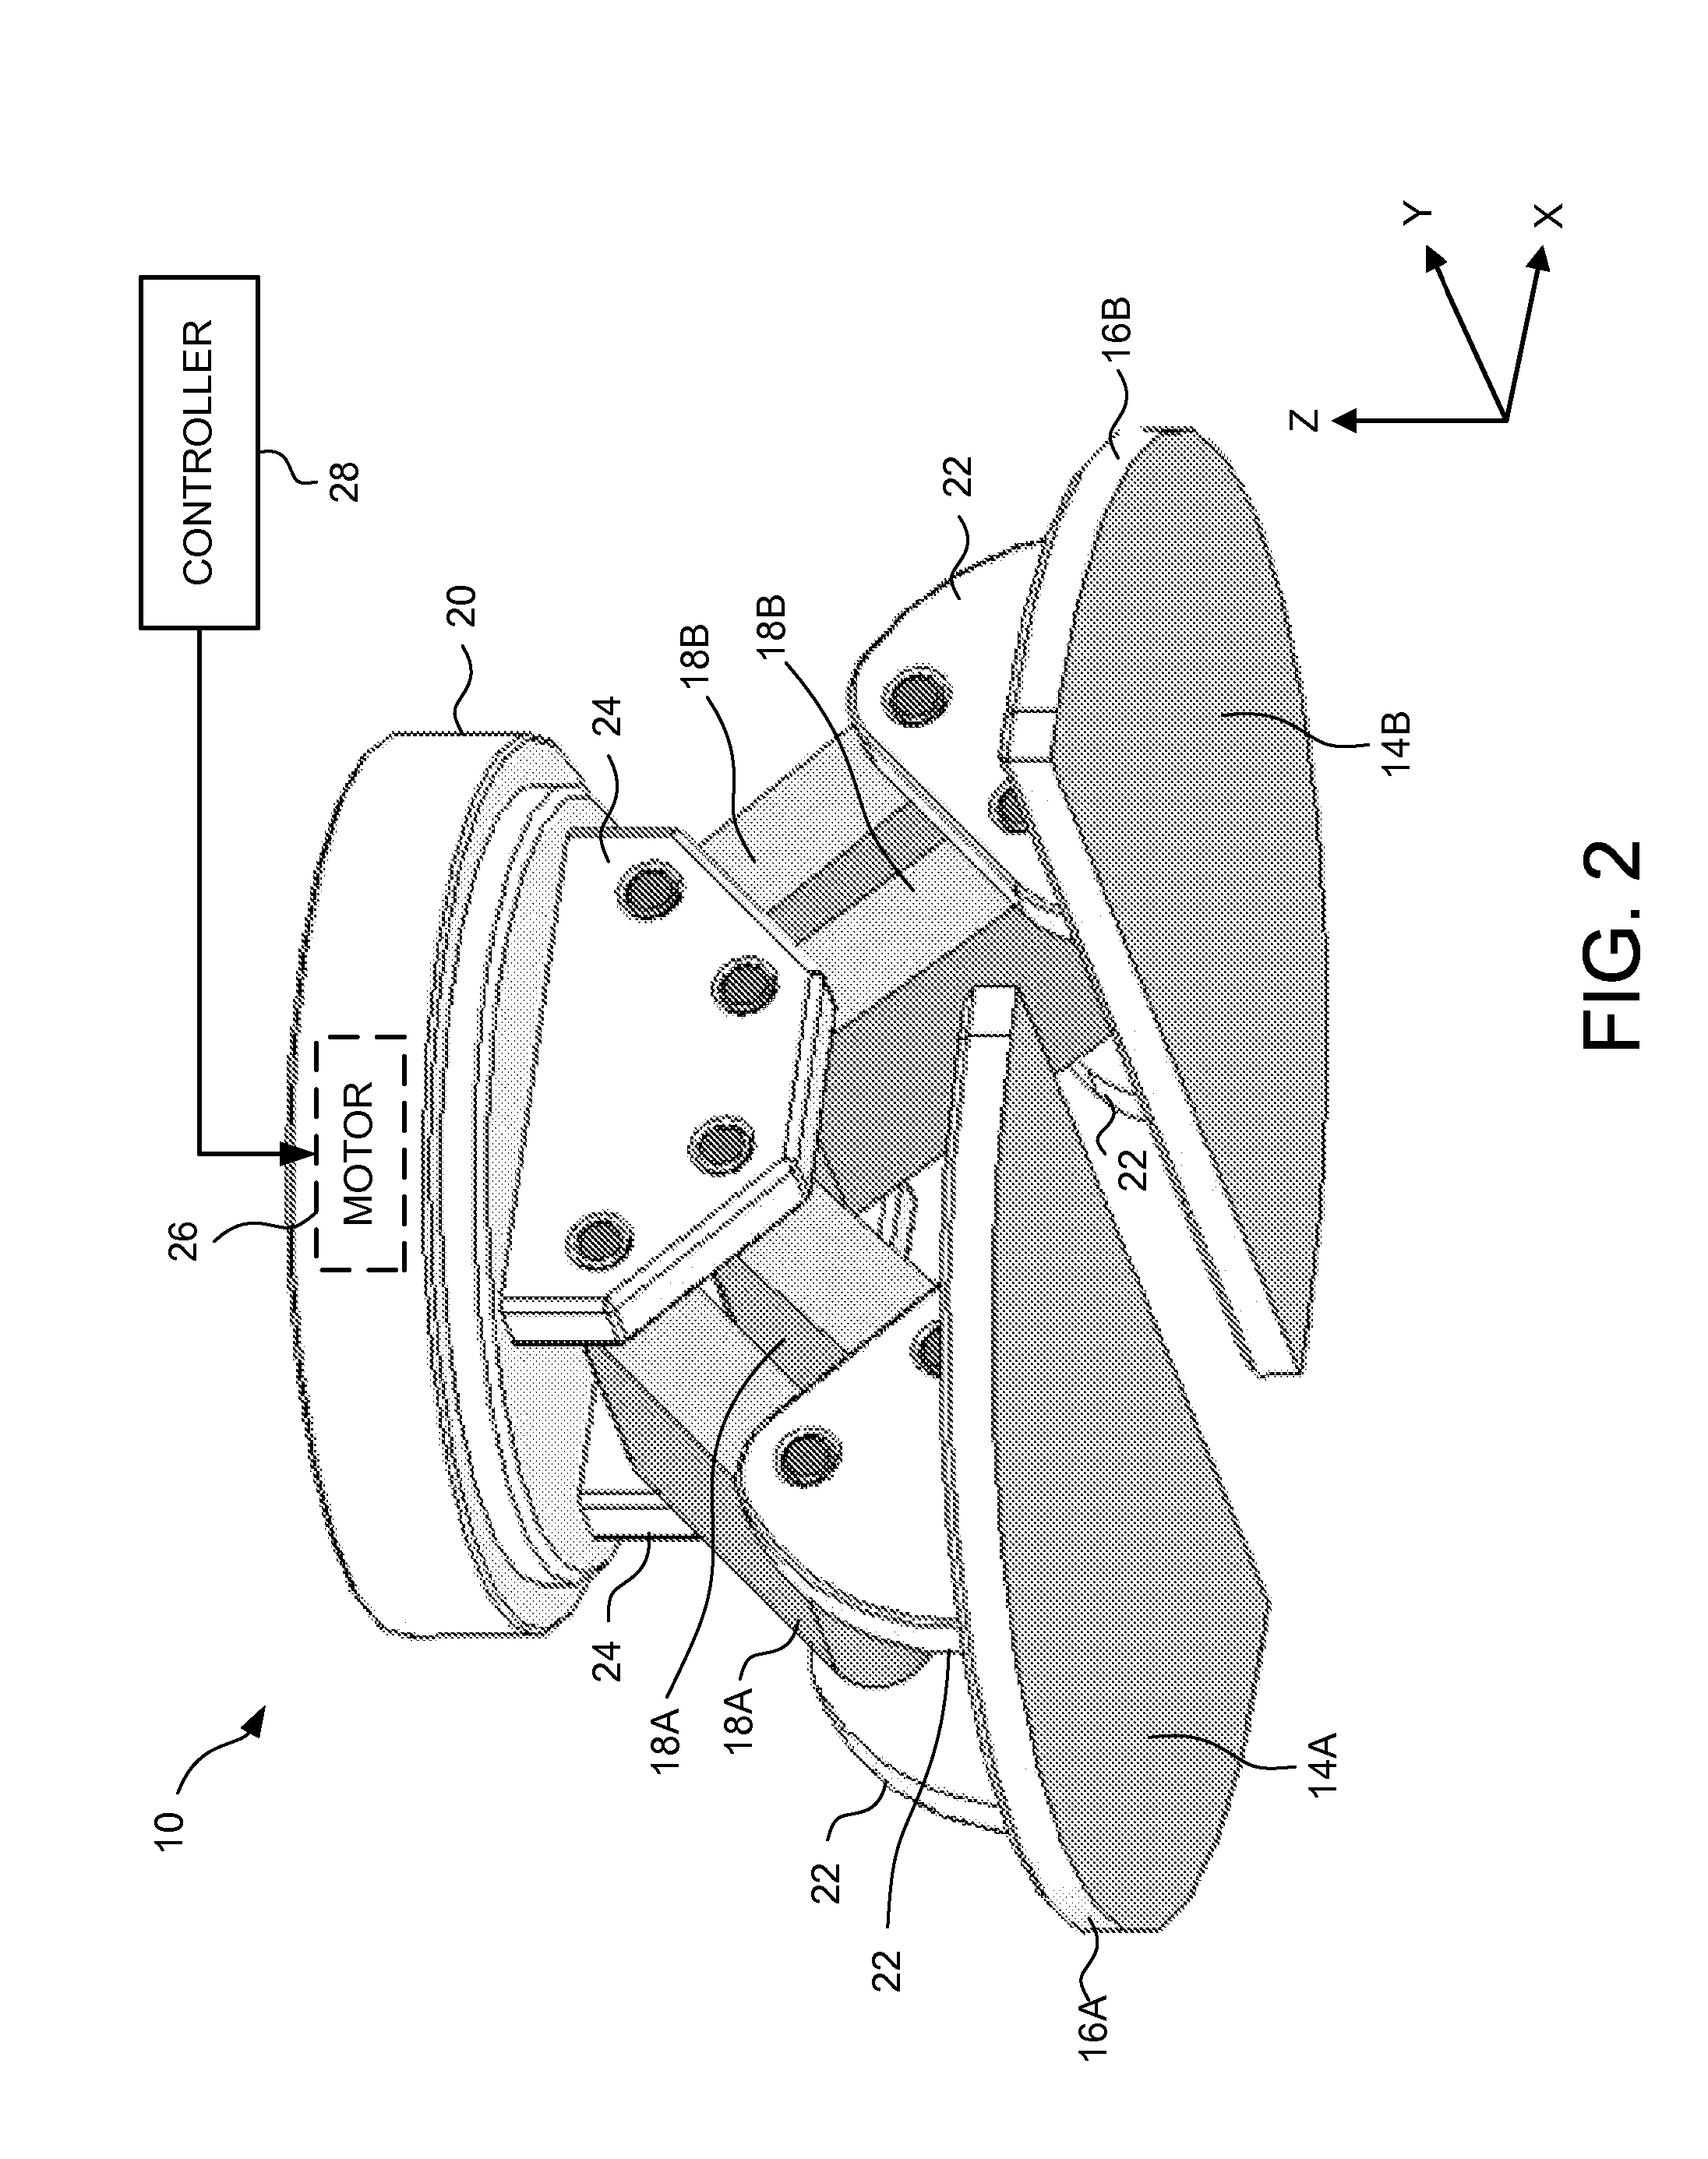 Device and method for handling an object of interest using a directional adhesive structure